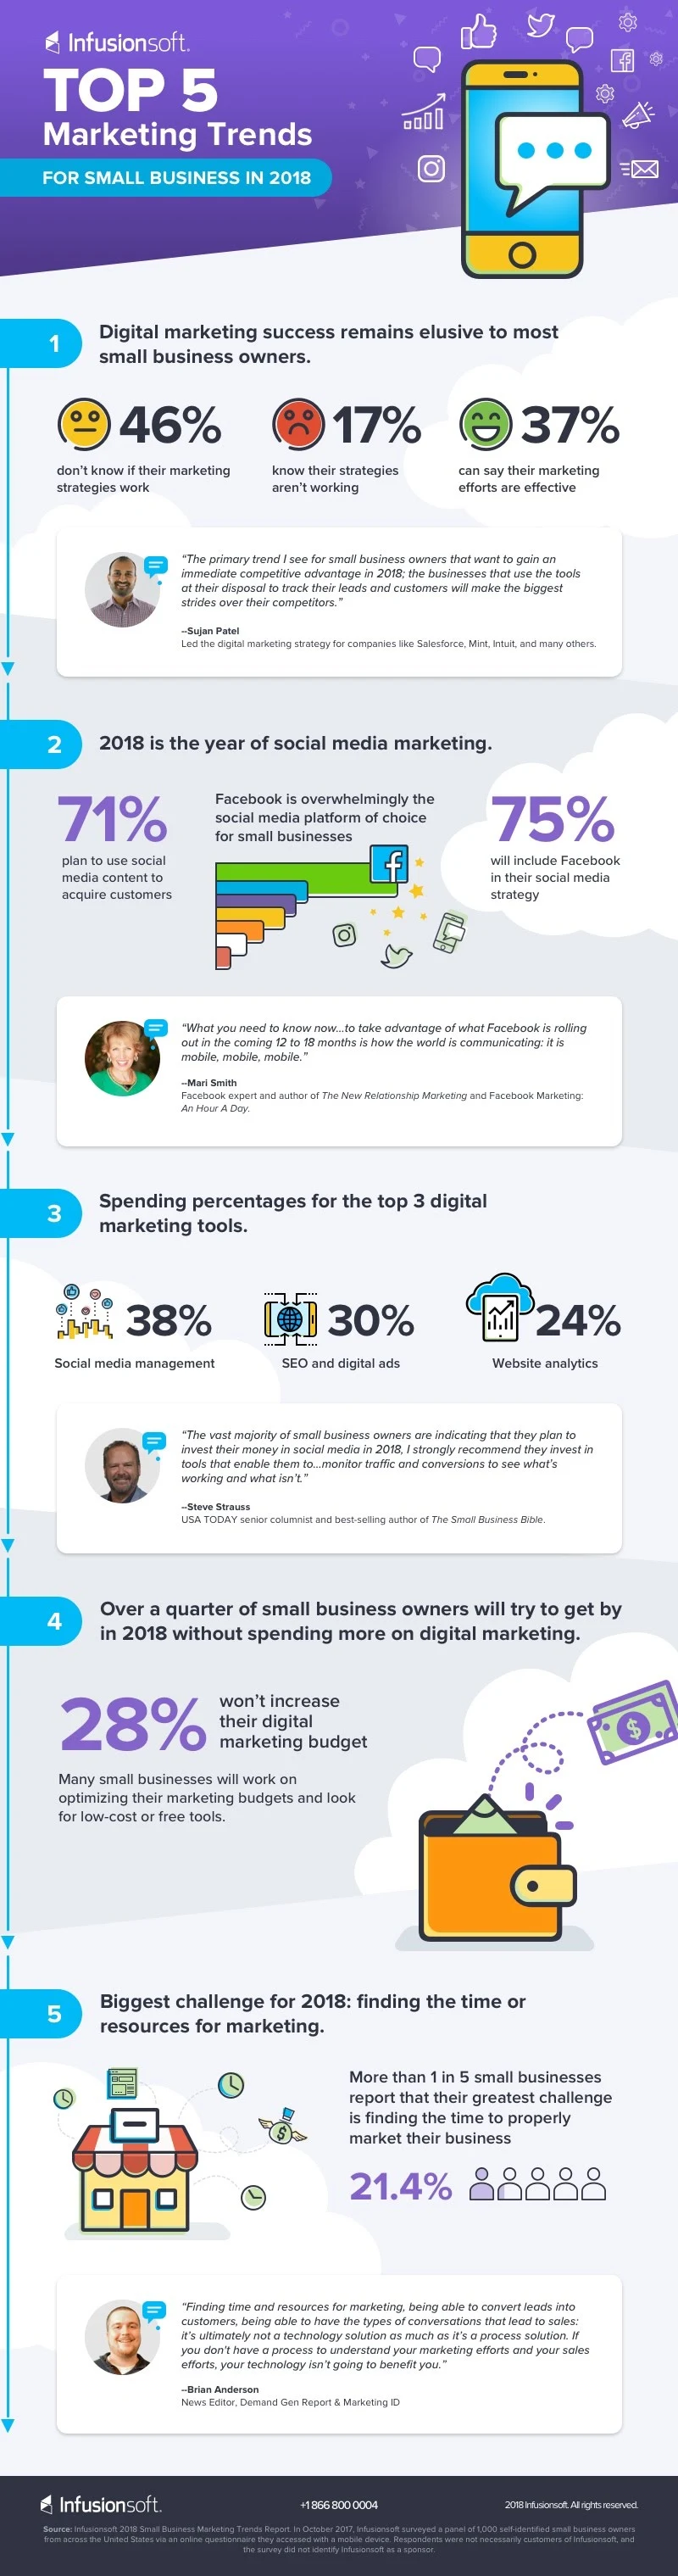 Top 5 Marketing Trends for Small Business in 2018 [Infographic]